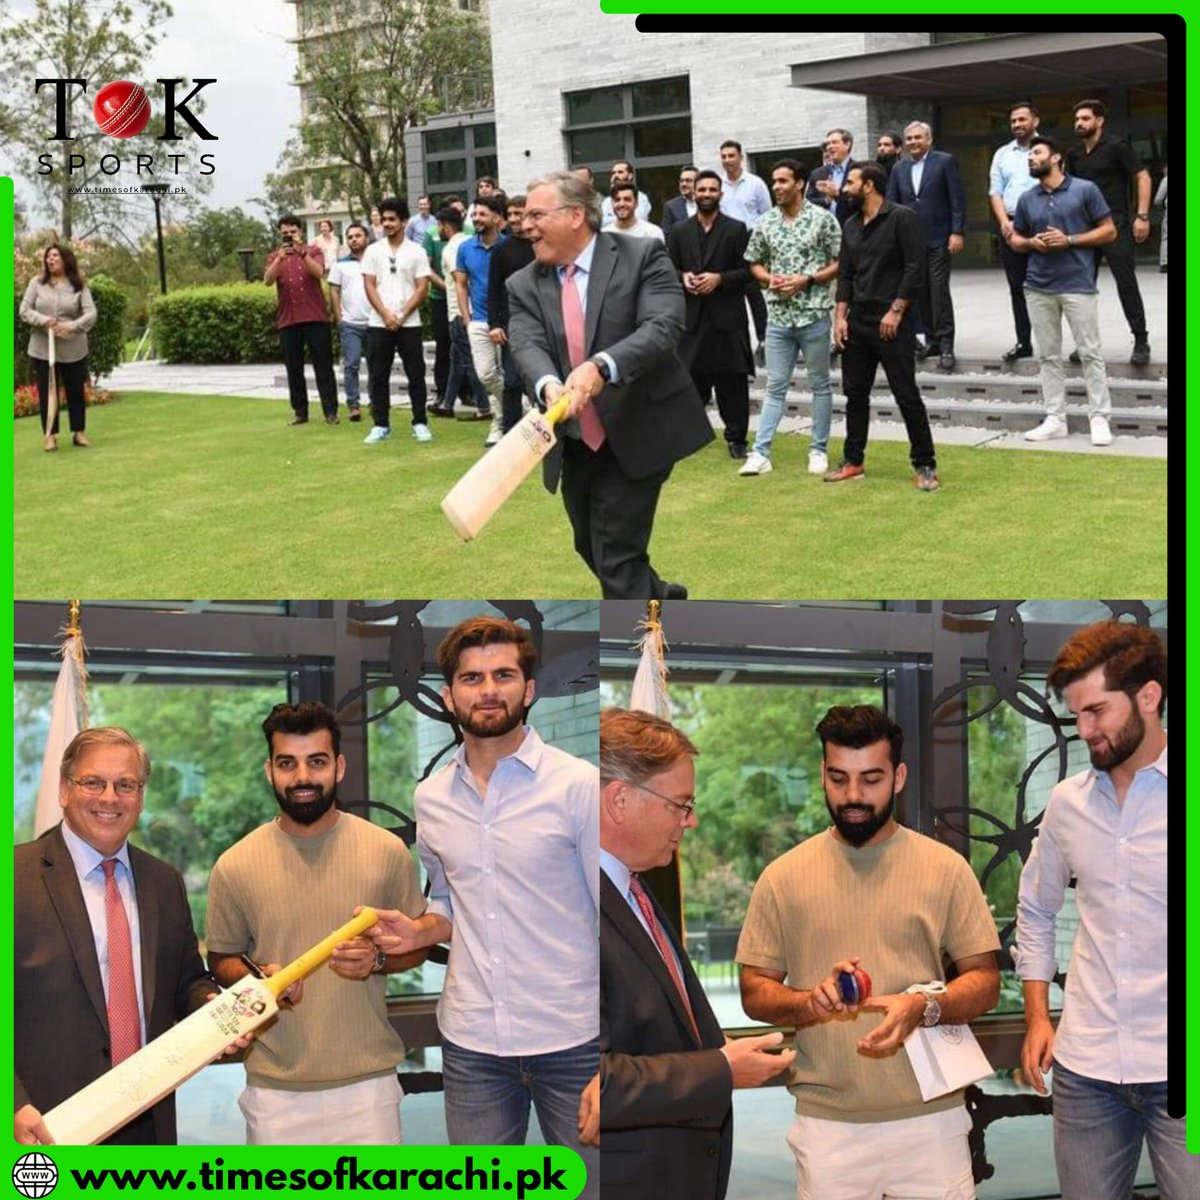 U.S. Ambassador Donald Blome hosted the Pakistan National Team Cricket players for a meet-and-greet at the U.S. Embassy in Islamabad

@usembislamabad

#TOKSports #PakistanTeam #USEmbassy